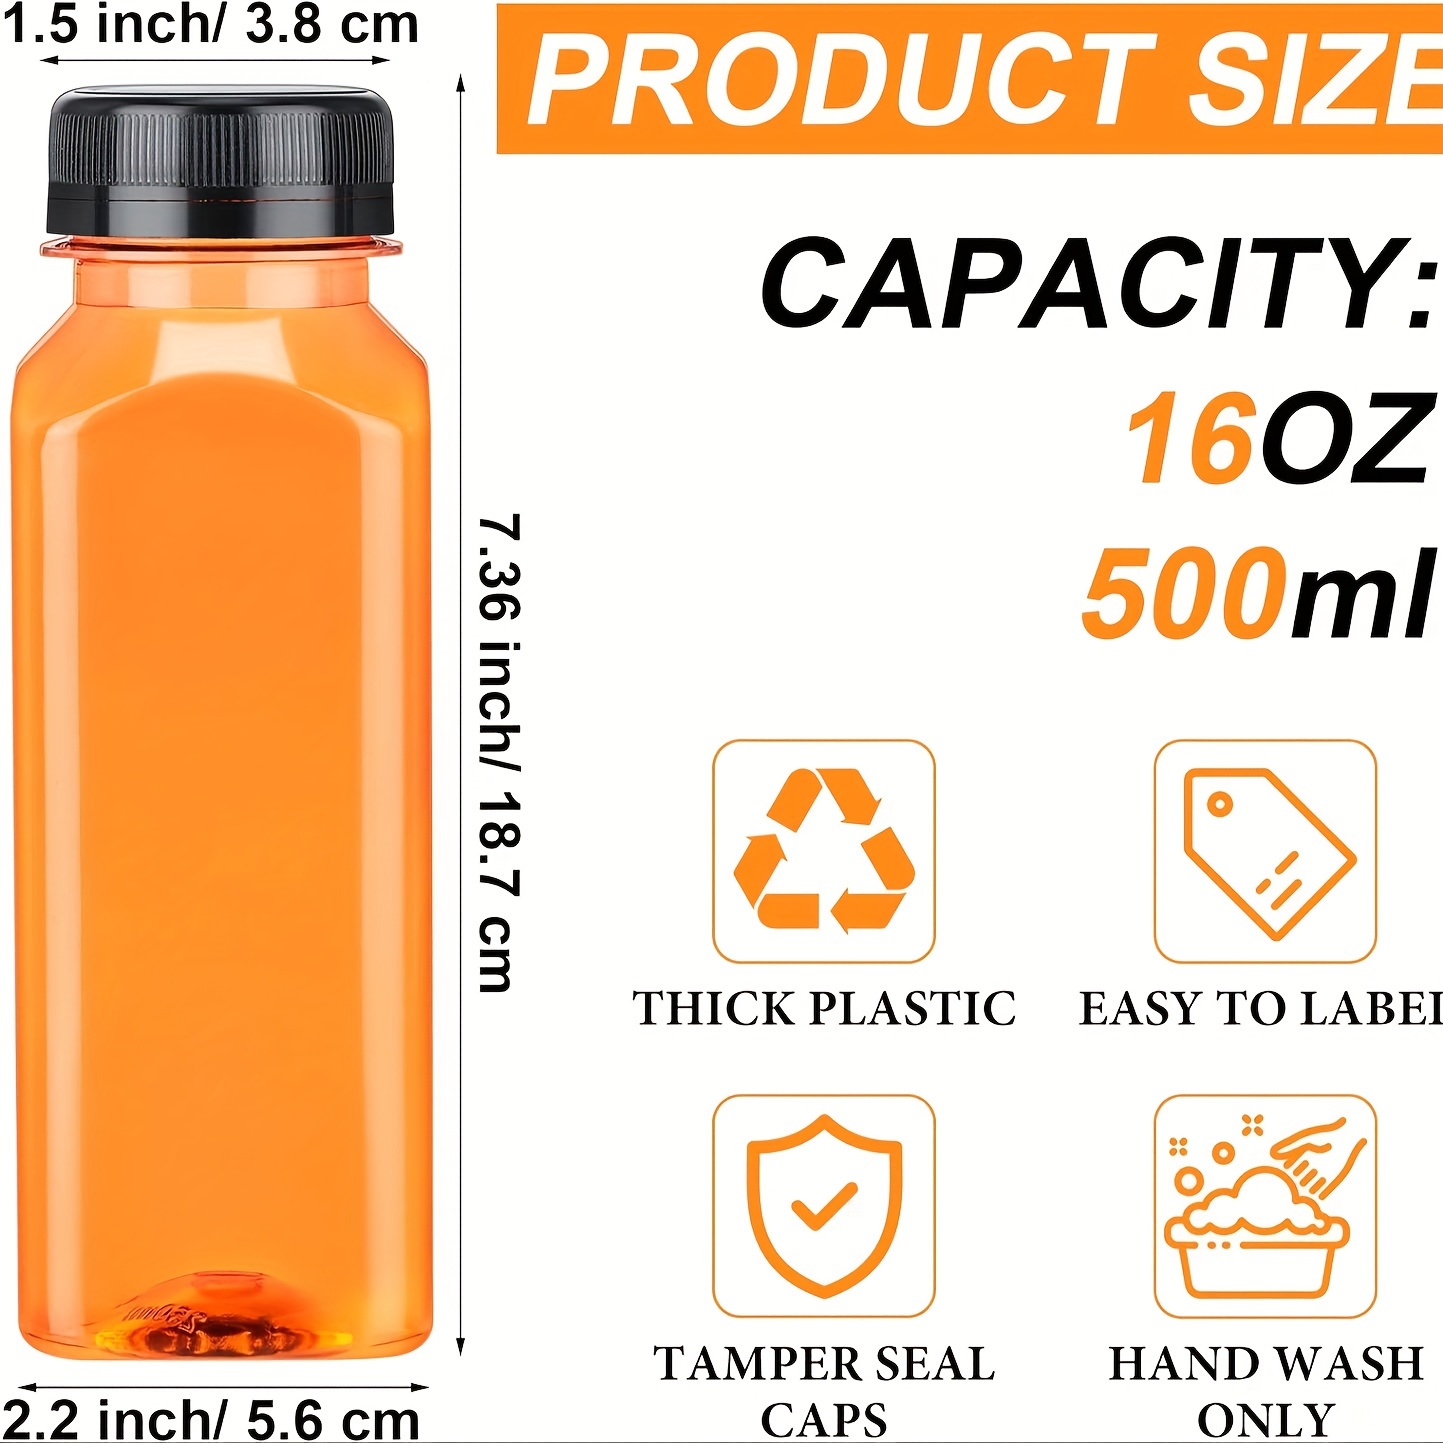  Juice Bottles with Caps for Juicing & Smoothies, Reusable Clear  Empty Plastic Bottles with Caps, 12 Ounce Drink Containers for Mini Fridge,  Juicer Shots, Small Water Bottles Bulk 12 oz (12